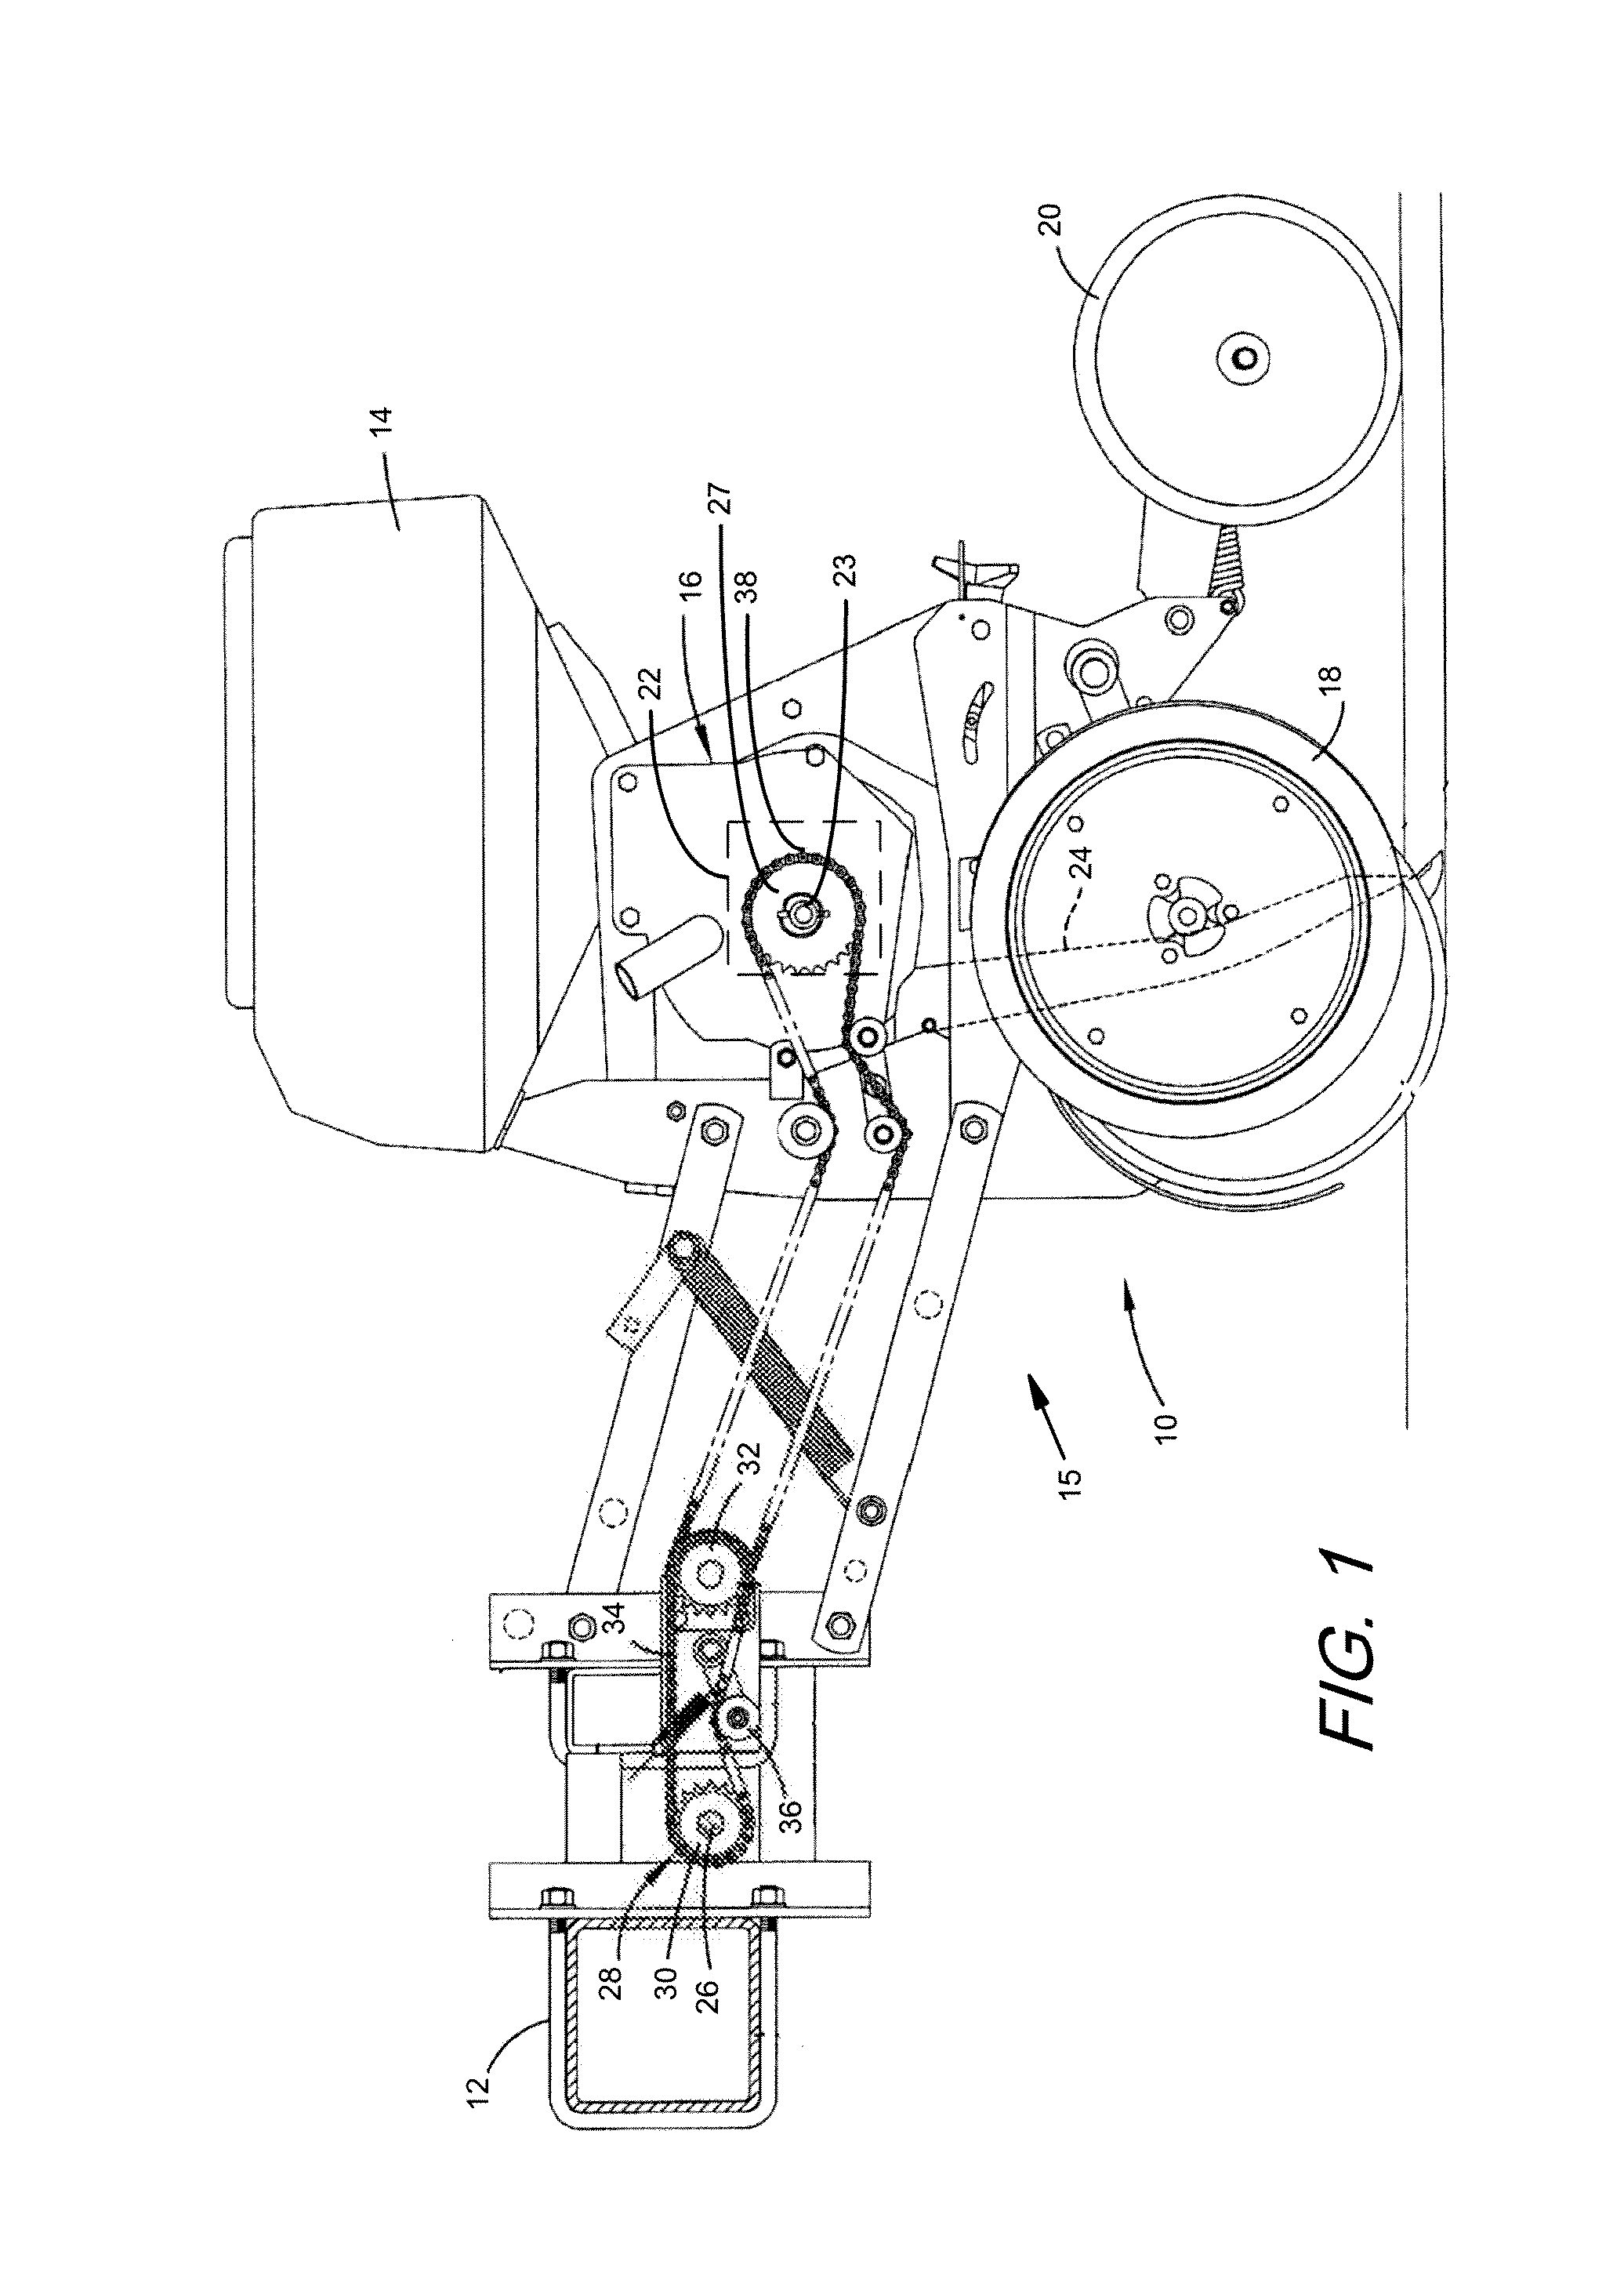 Method and apparatus for controlling seed population